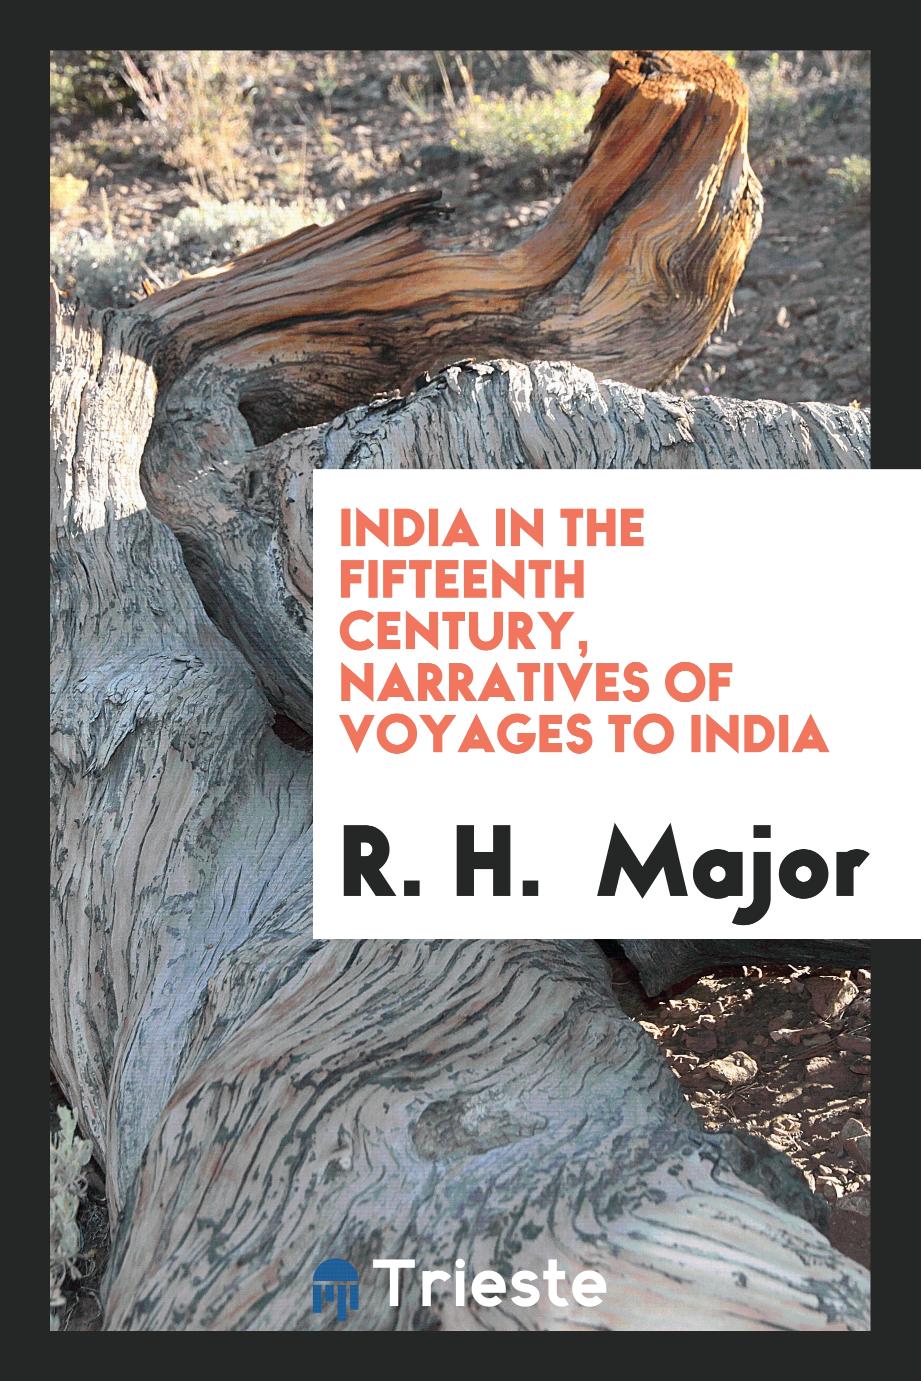 India in the fifteenth century, narratives of voyages to India